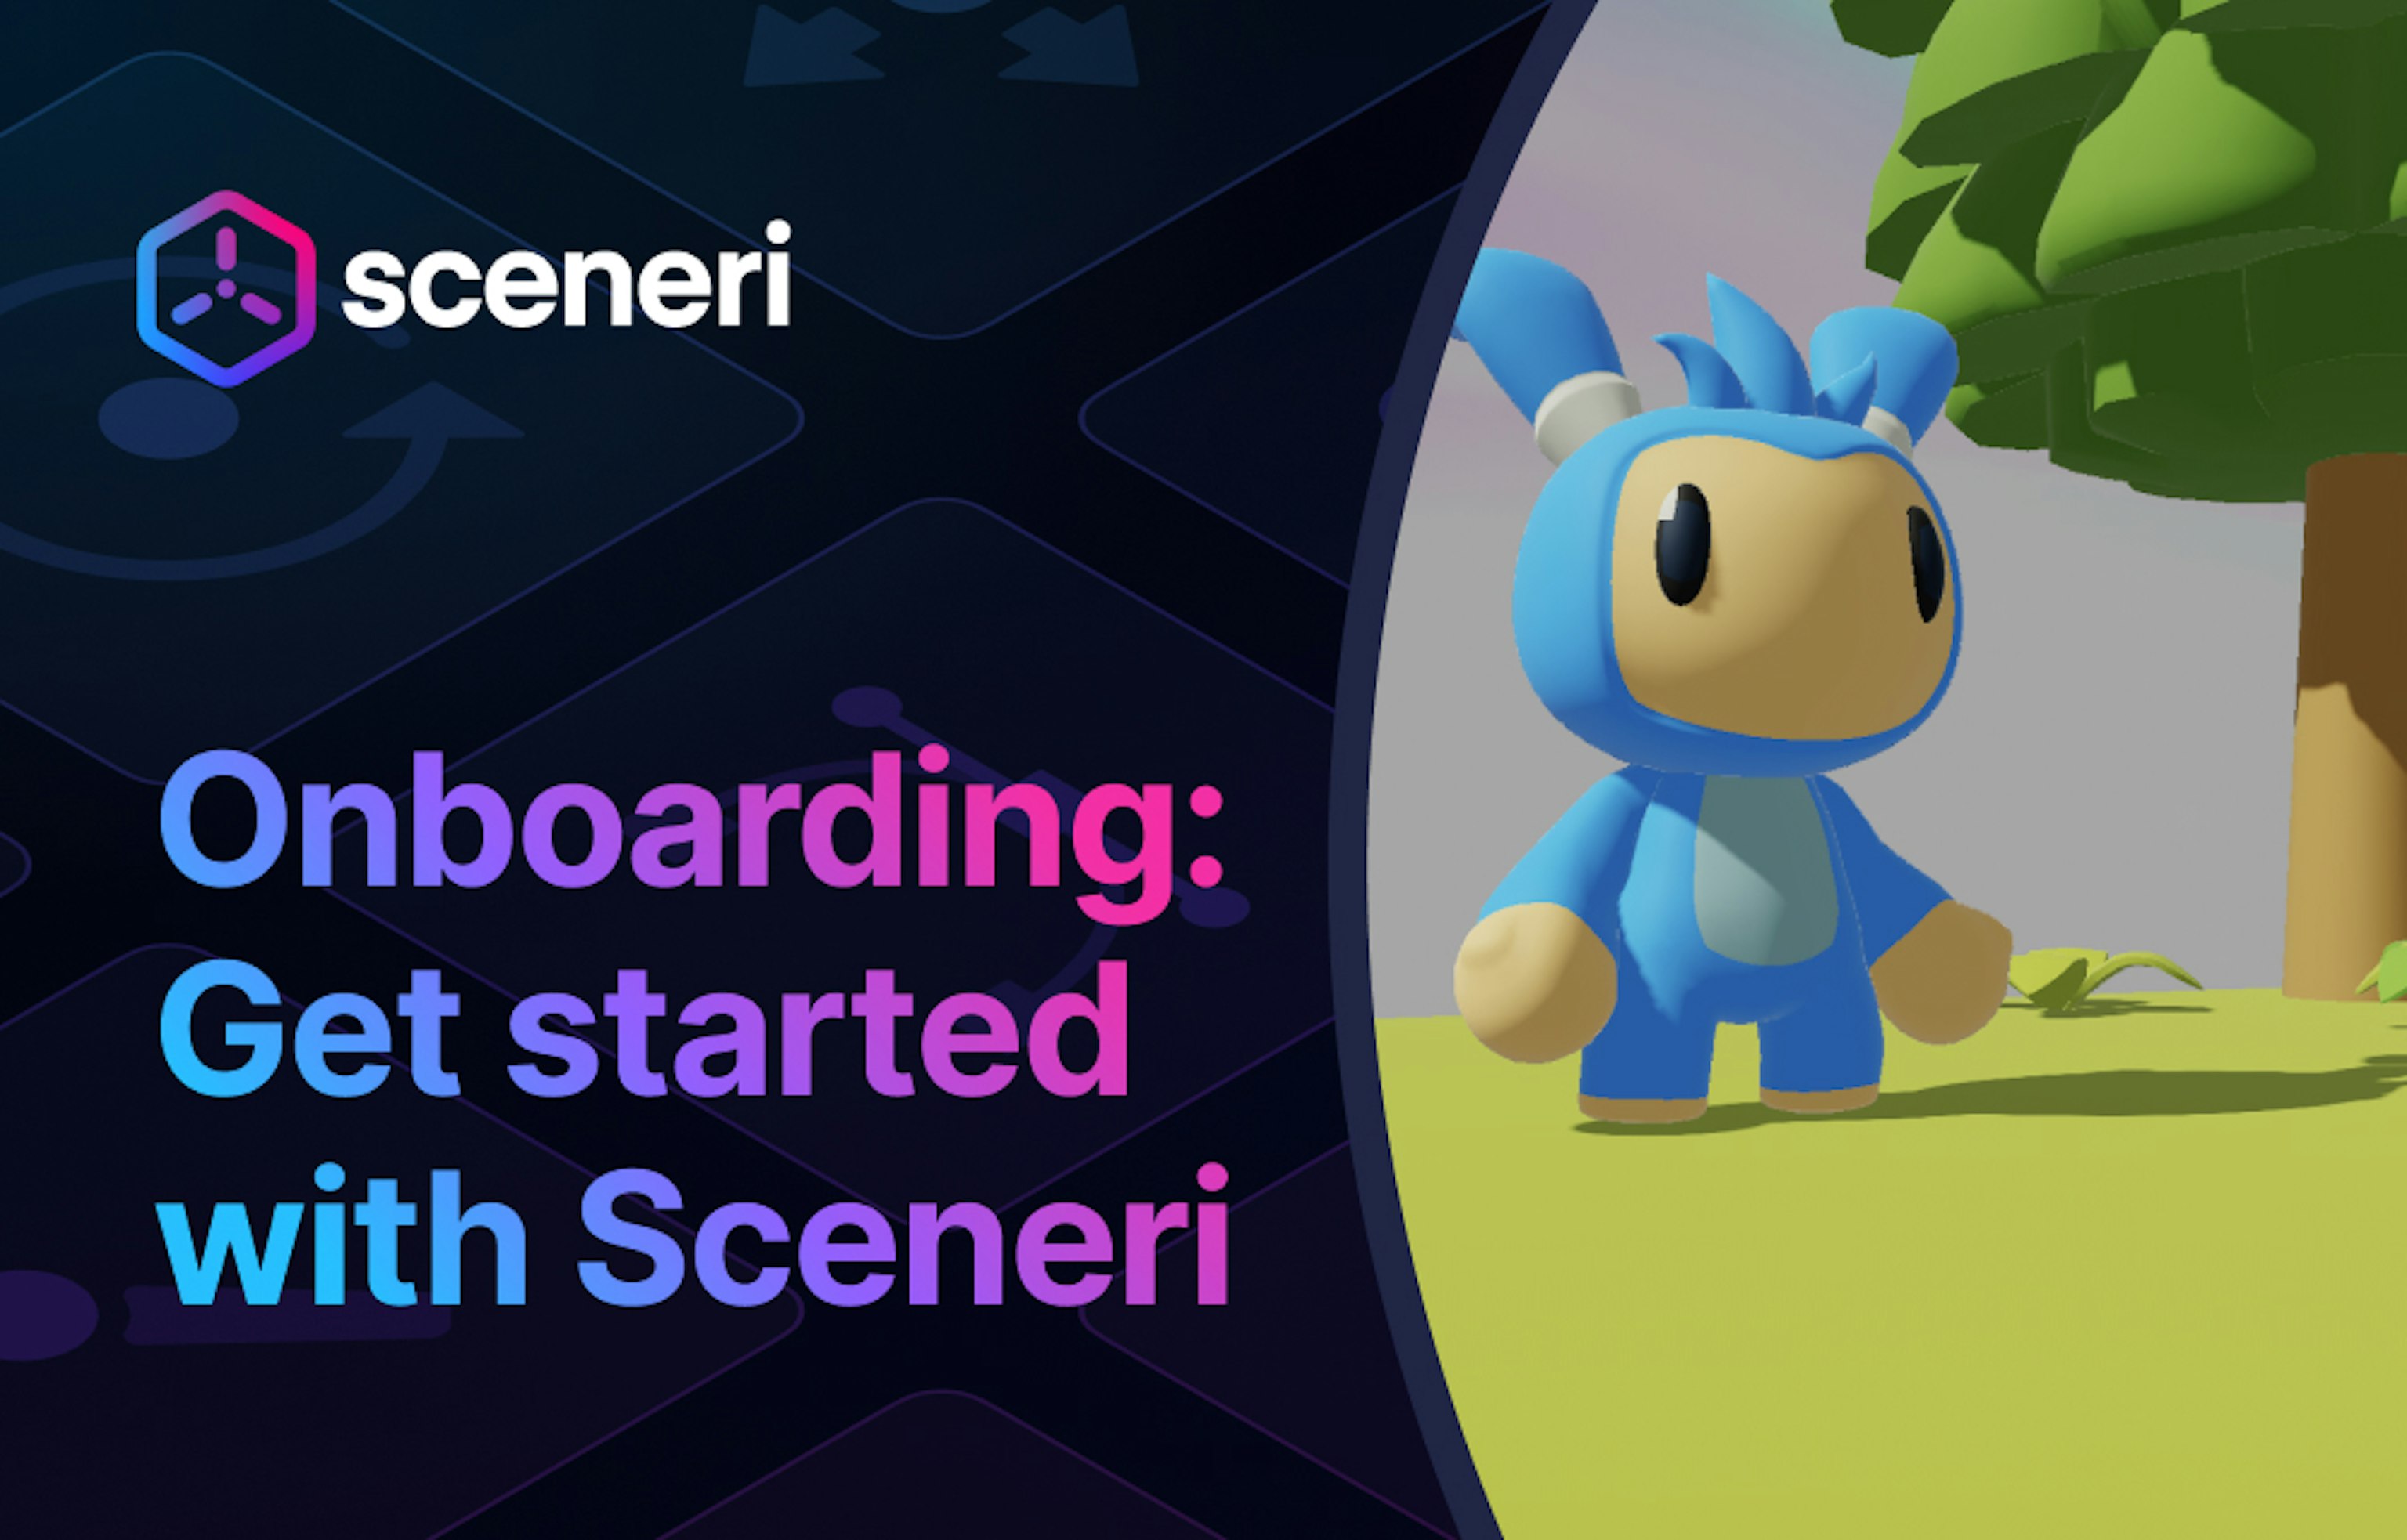 Getting Started with Sceneri: Easy Onboarding for New Users